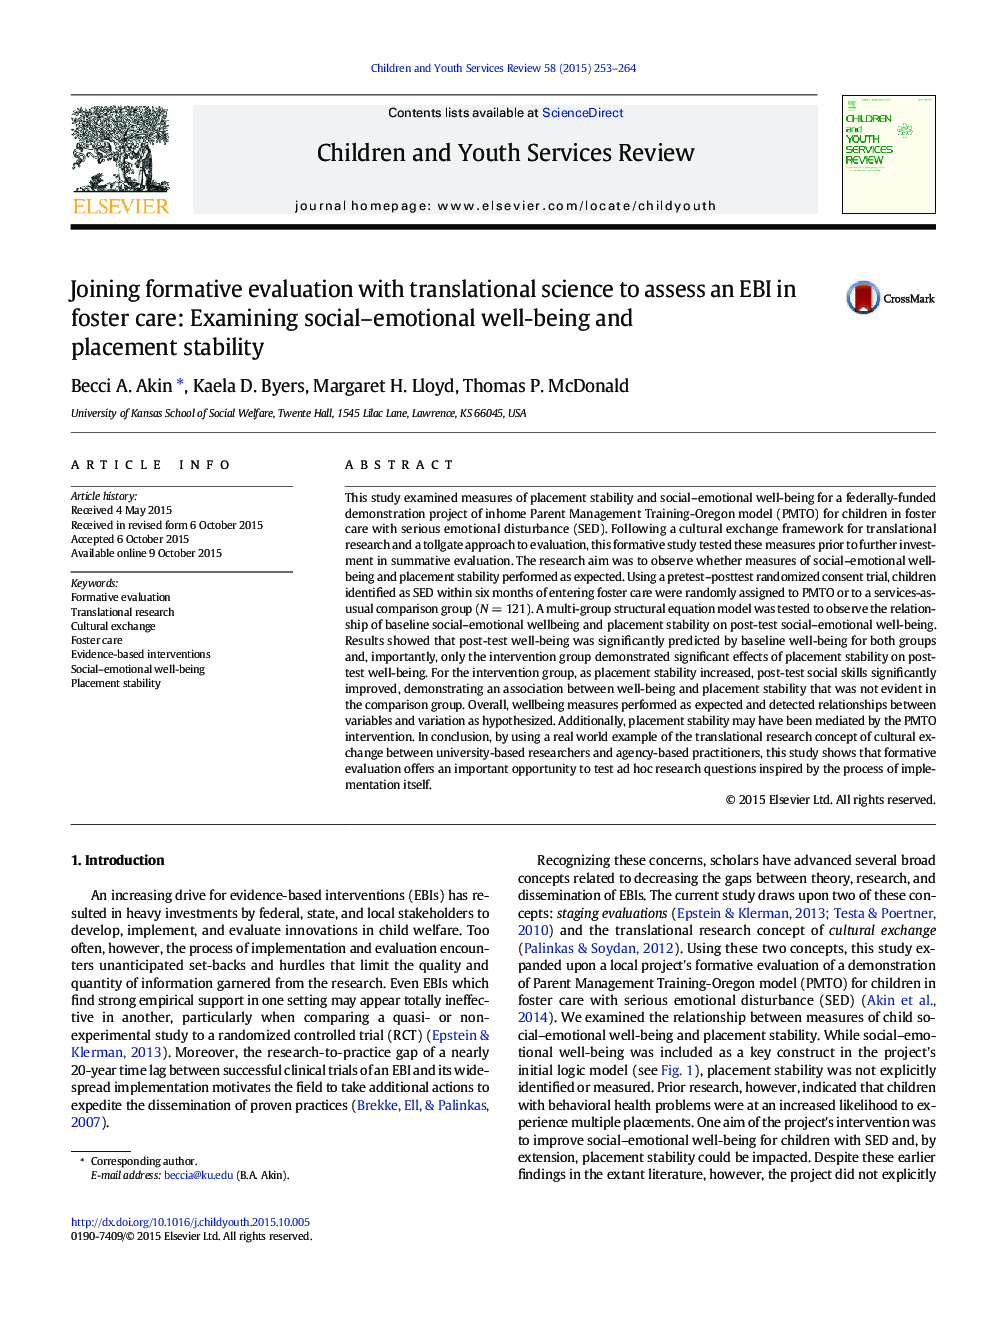 Joining formative evaluation with translational science to assess an EBI in foster care: Examining social–emotional well-being and placement stability